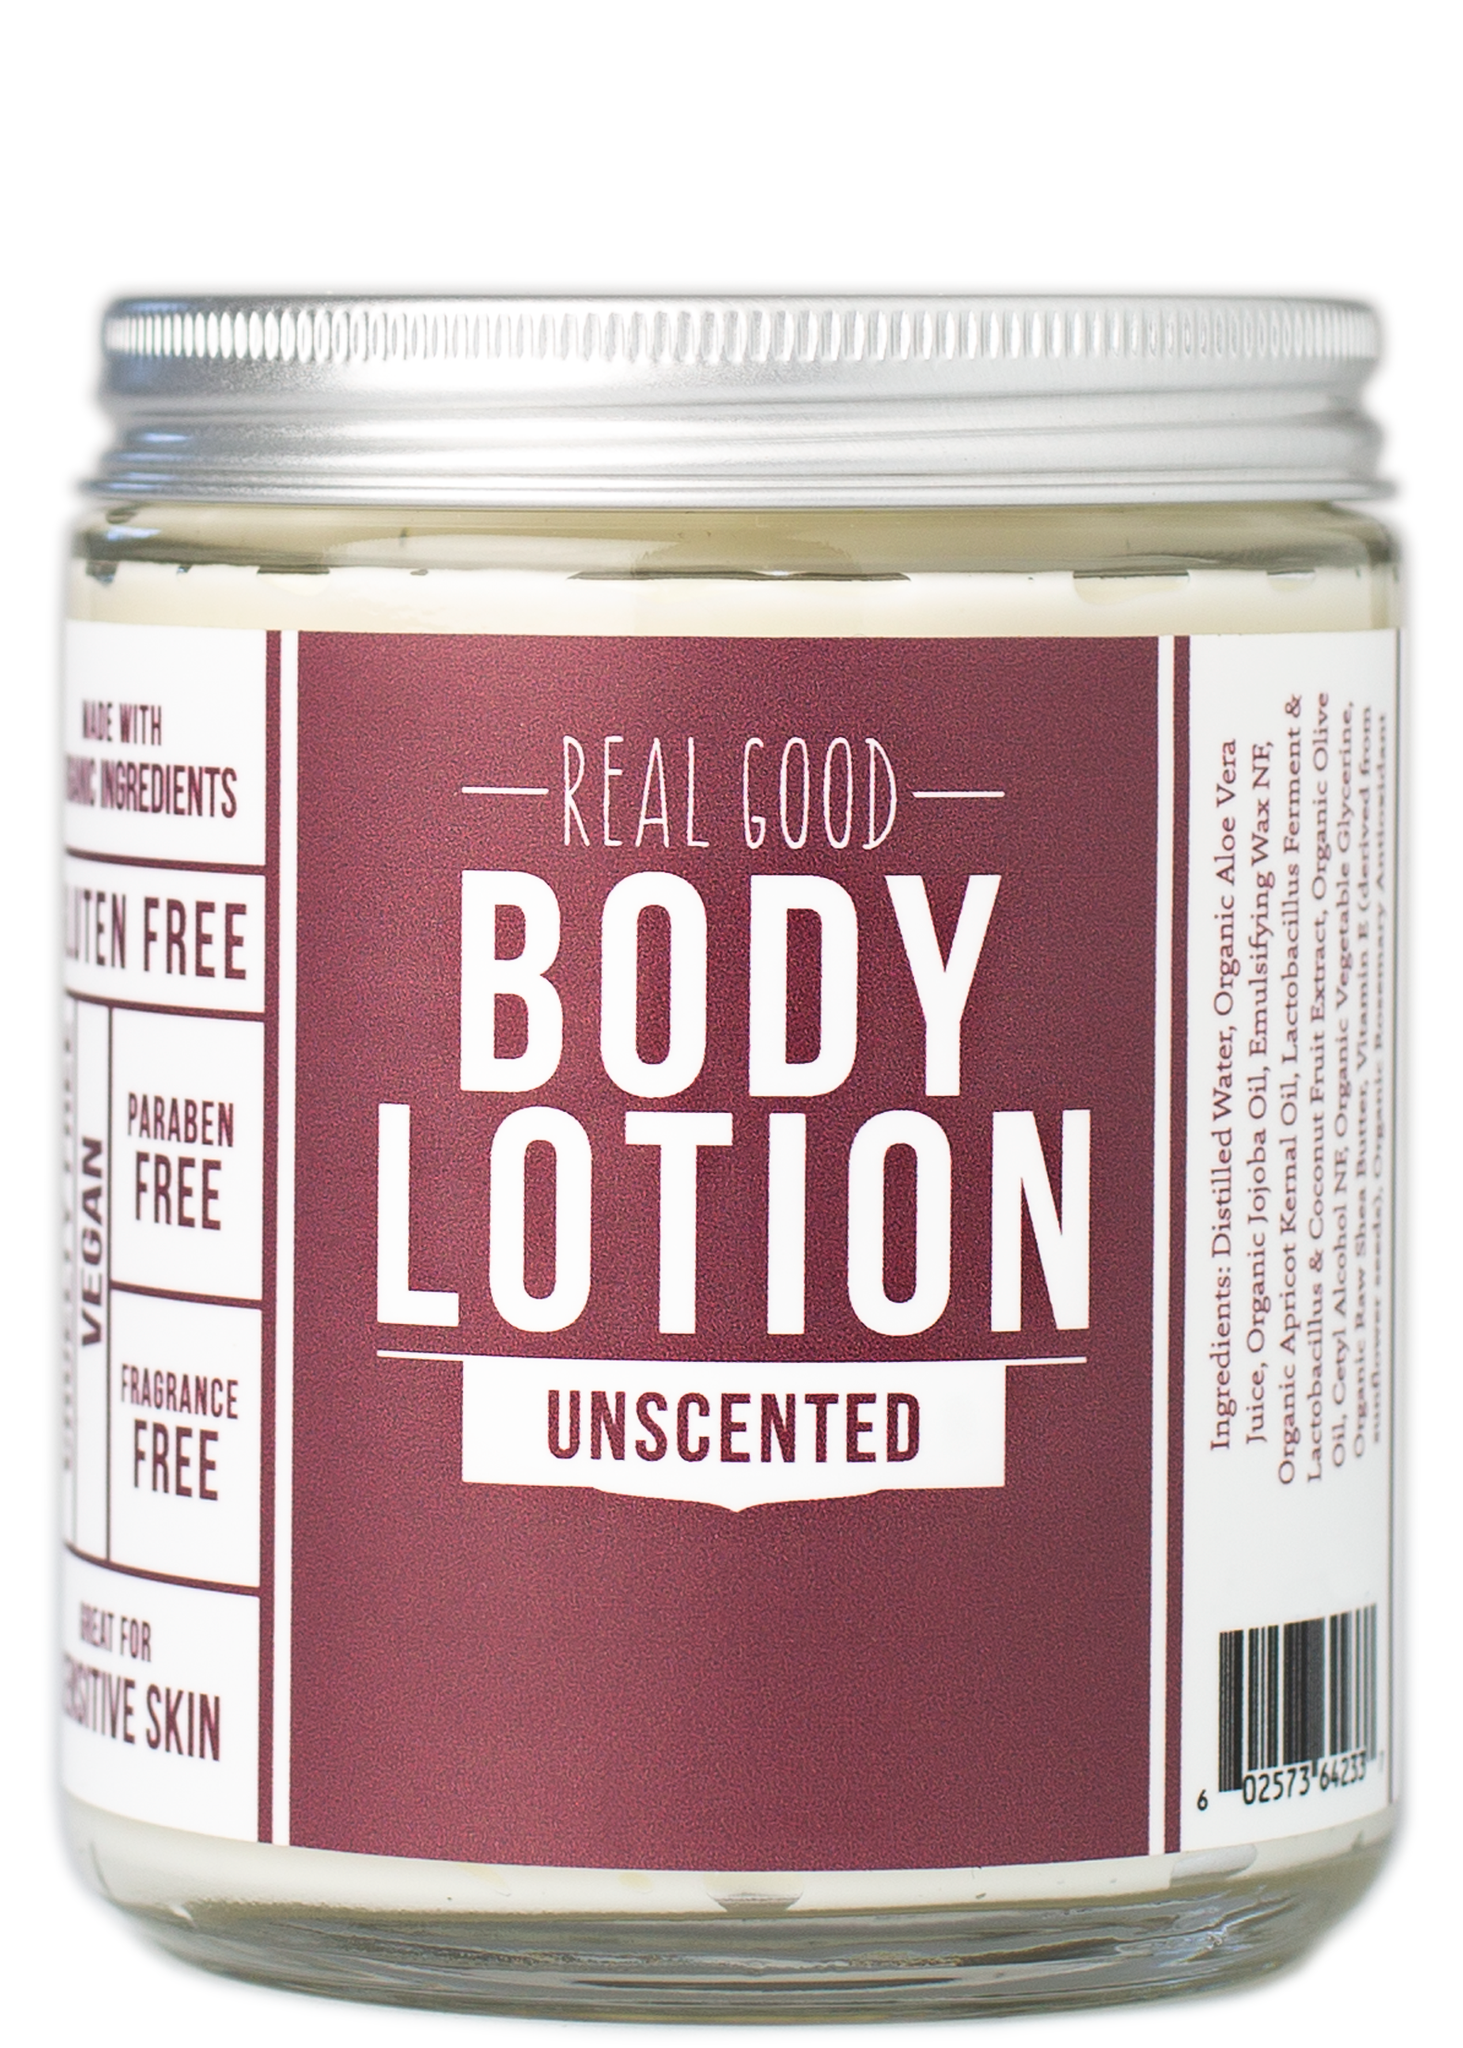 Real Good Body Lotion / Unscented {new packaging!}